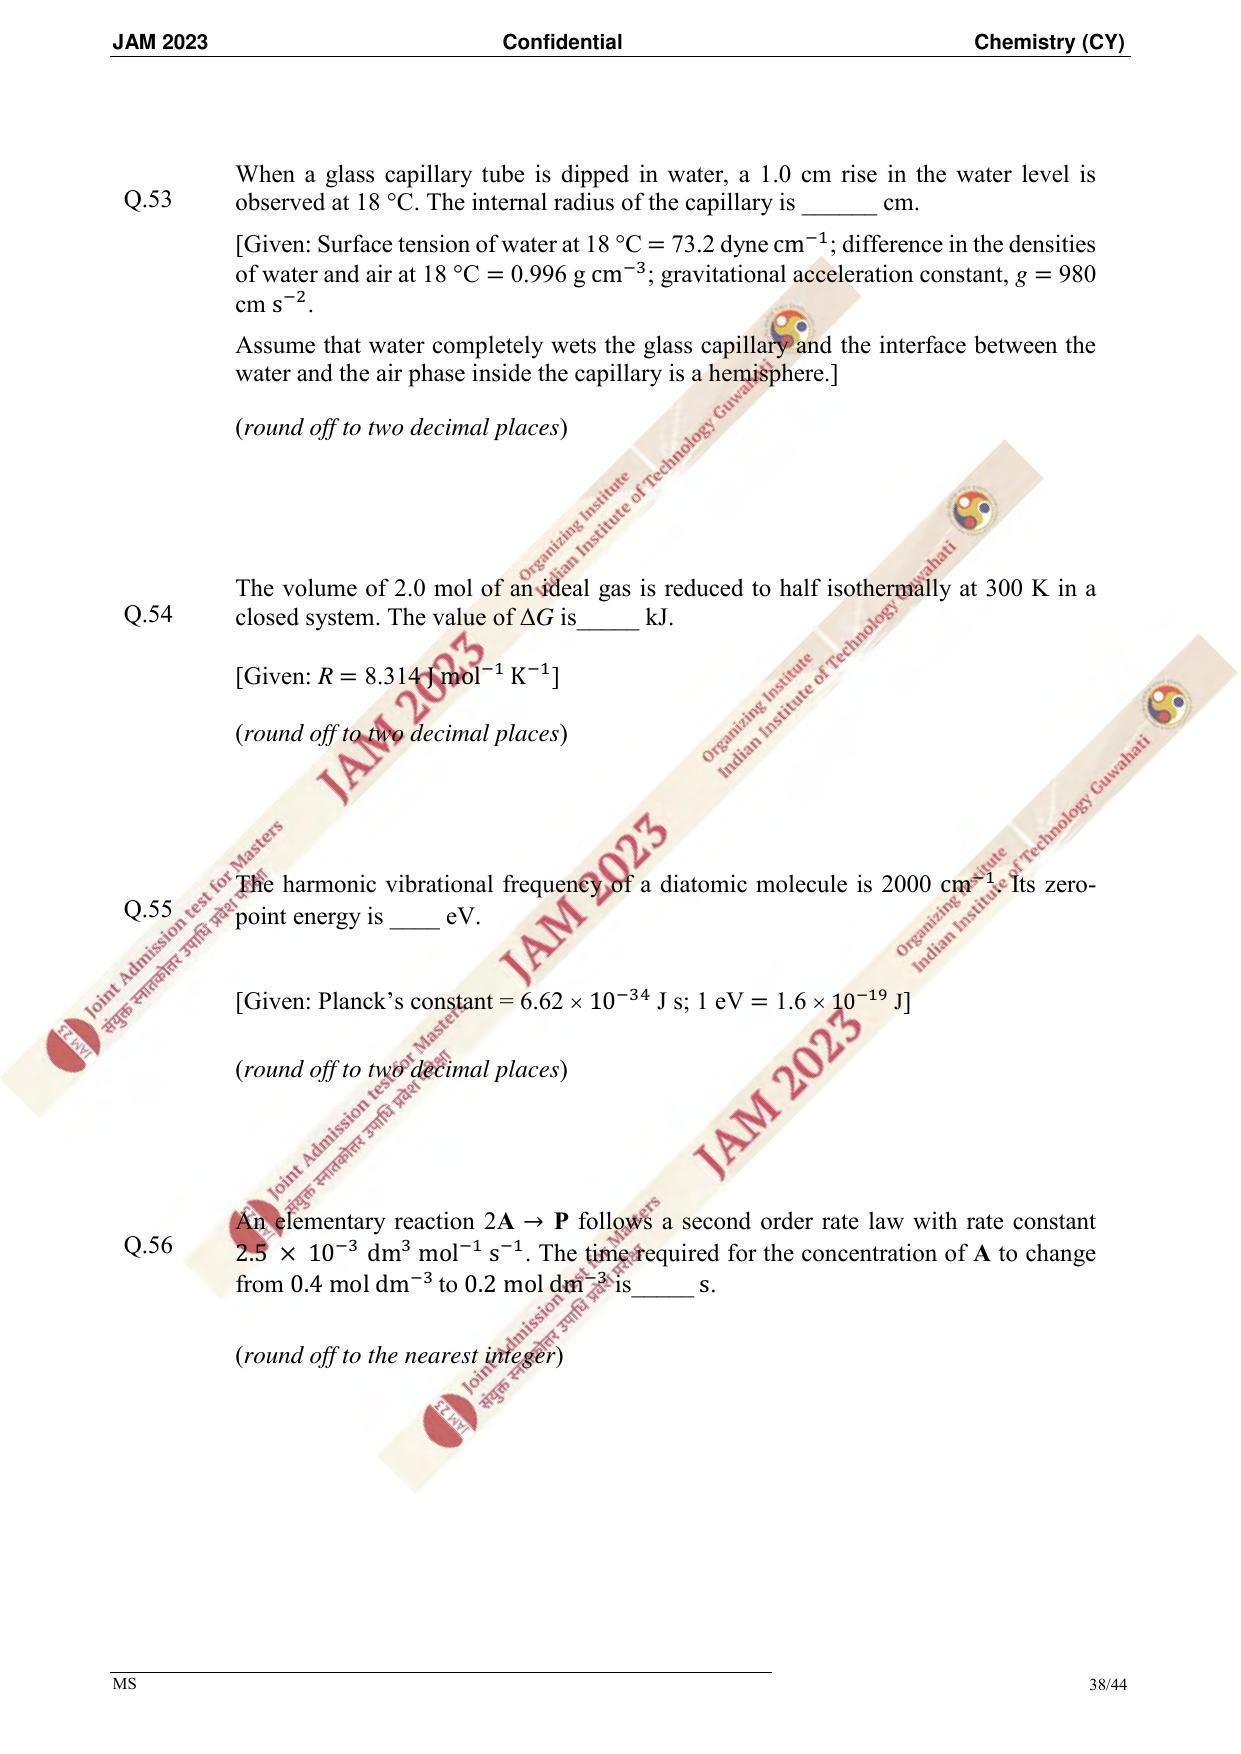 JAM 2023: CY Question Paper - Page 36